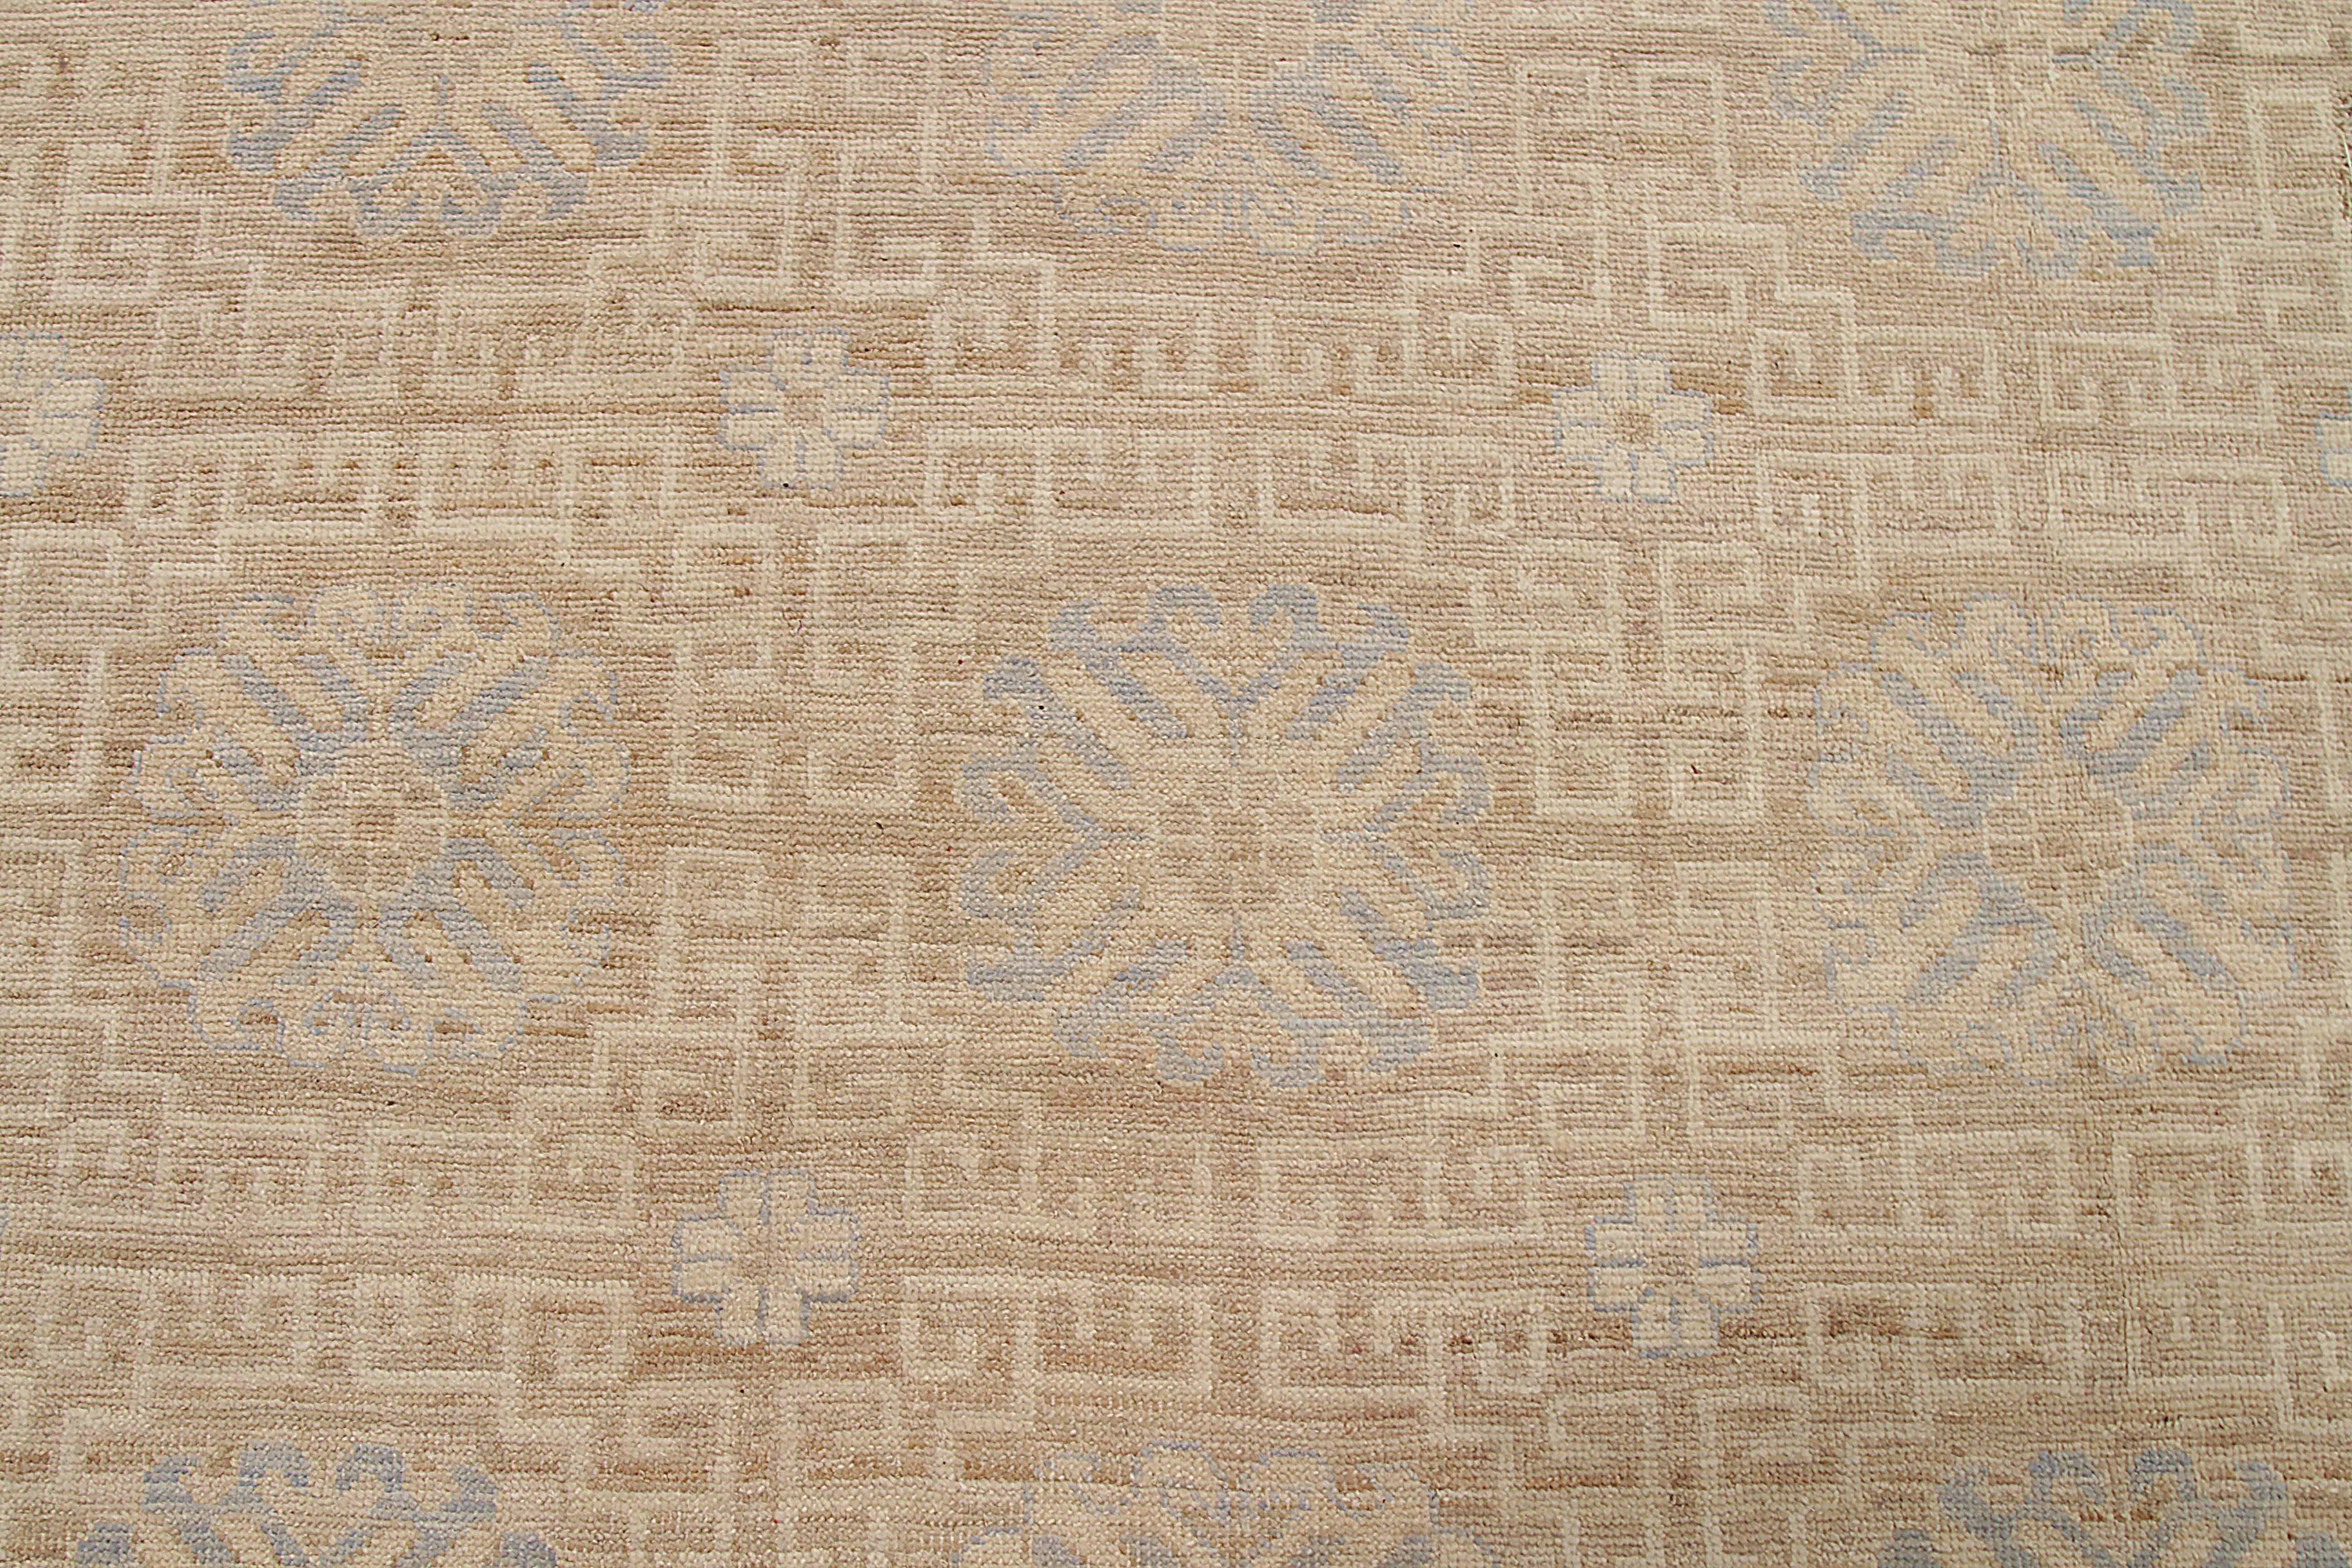 New Afghan Area Rug Khotan Design In New Condition For Sale In Dallas, TX